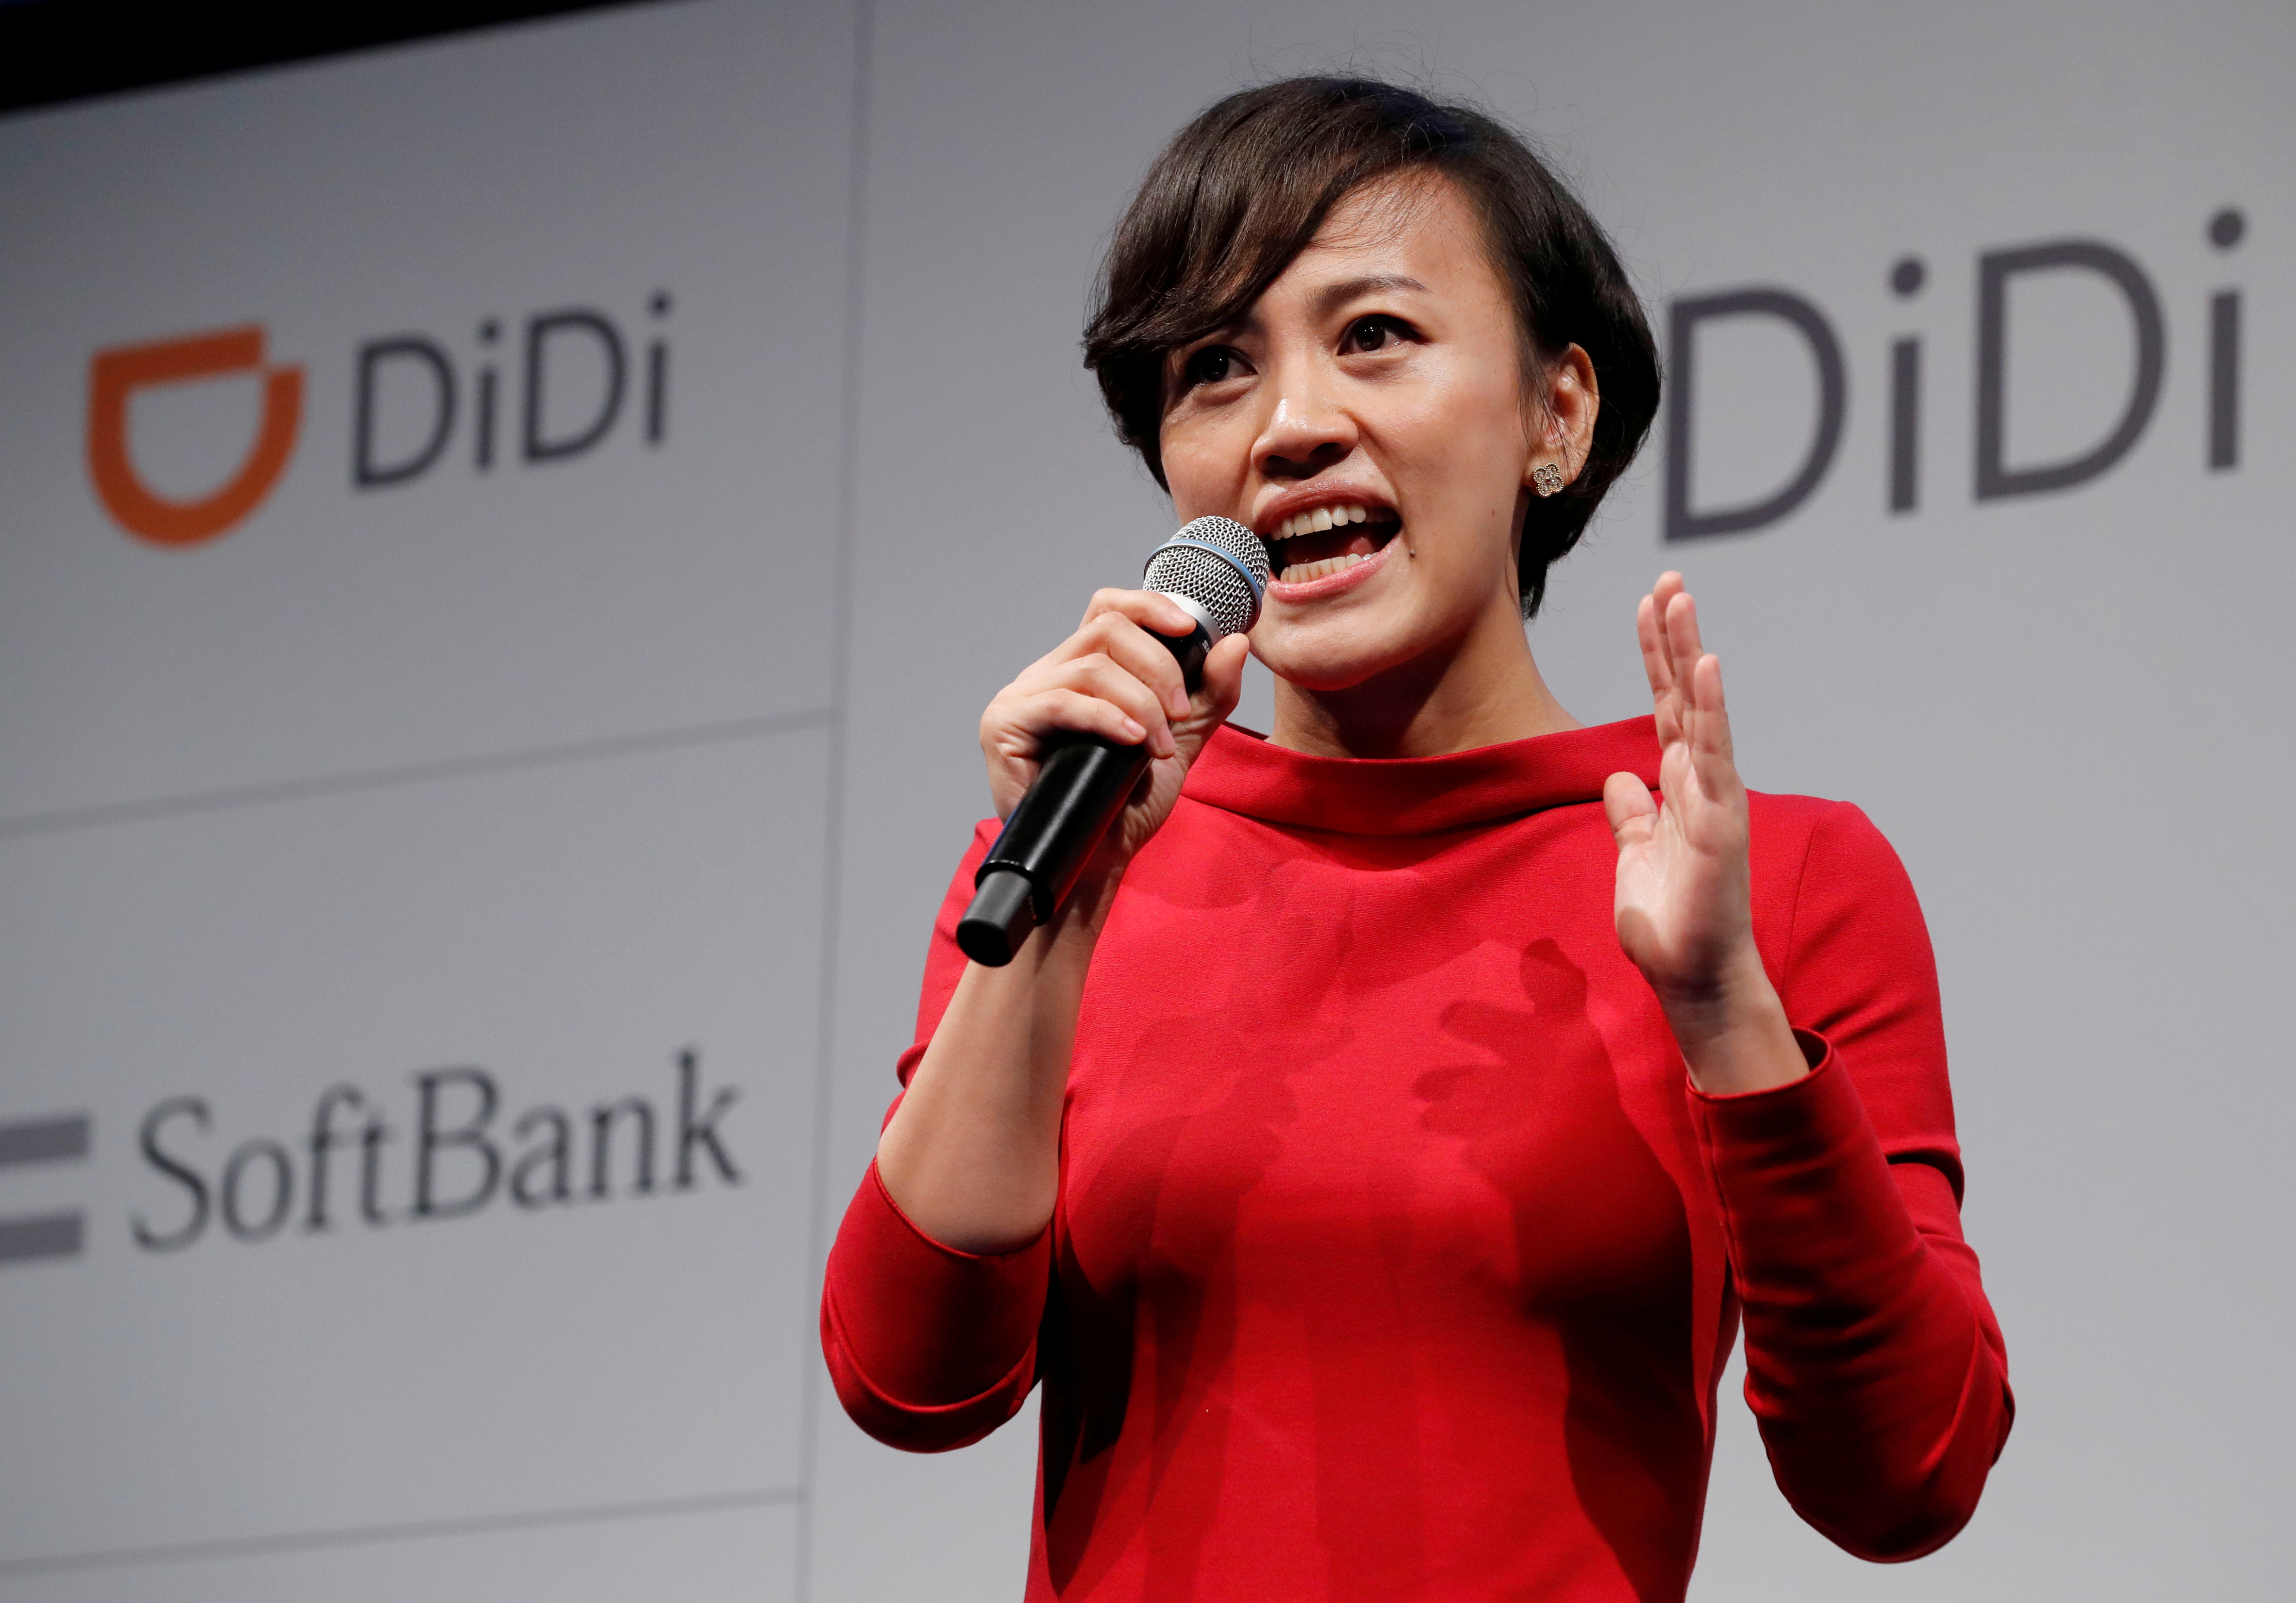 President of Didi Chuxing Jean Liu speaks during a news conference about their Japanese taxi-hailing joint venture in Tokyo